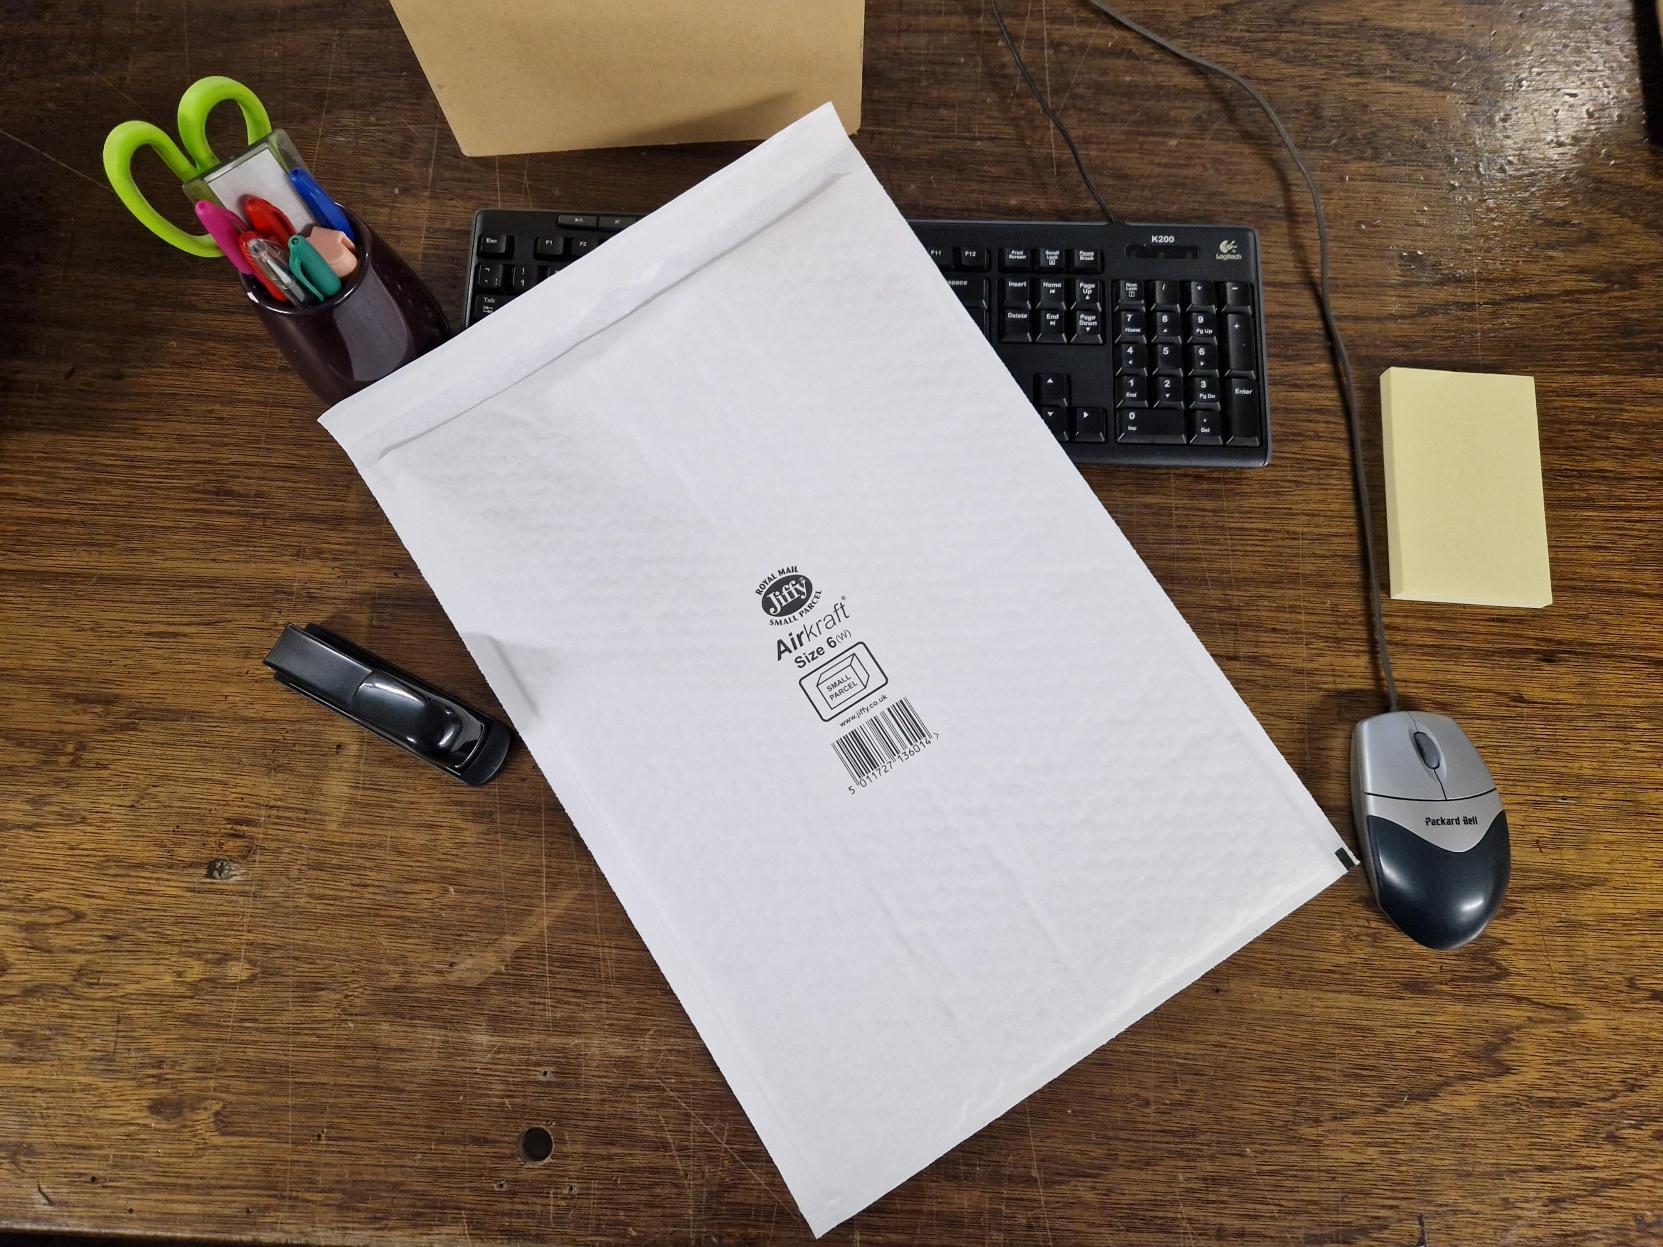 Jiffy Airkraft JL-6 White Bubble Lined Mailer, a compact Jiffy envelope measuring 320mm x 460mm, offering excellent protection during shipping.